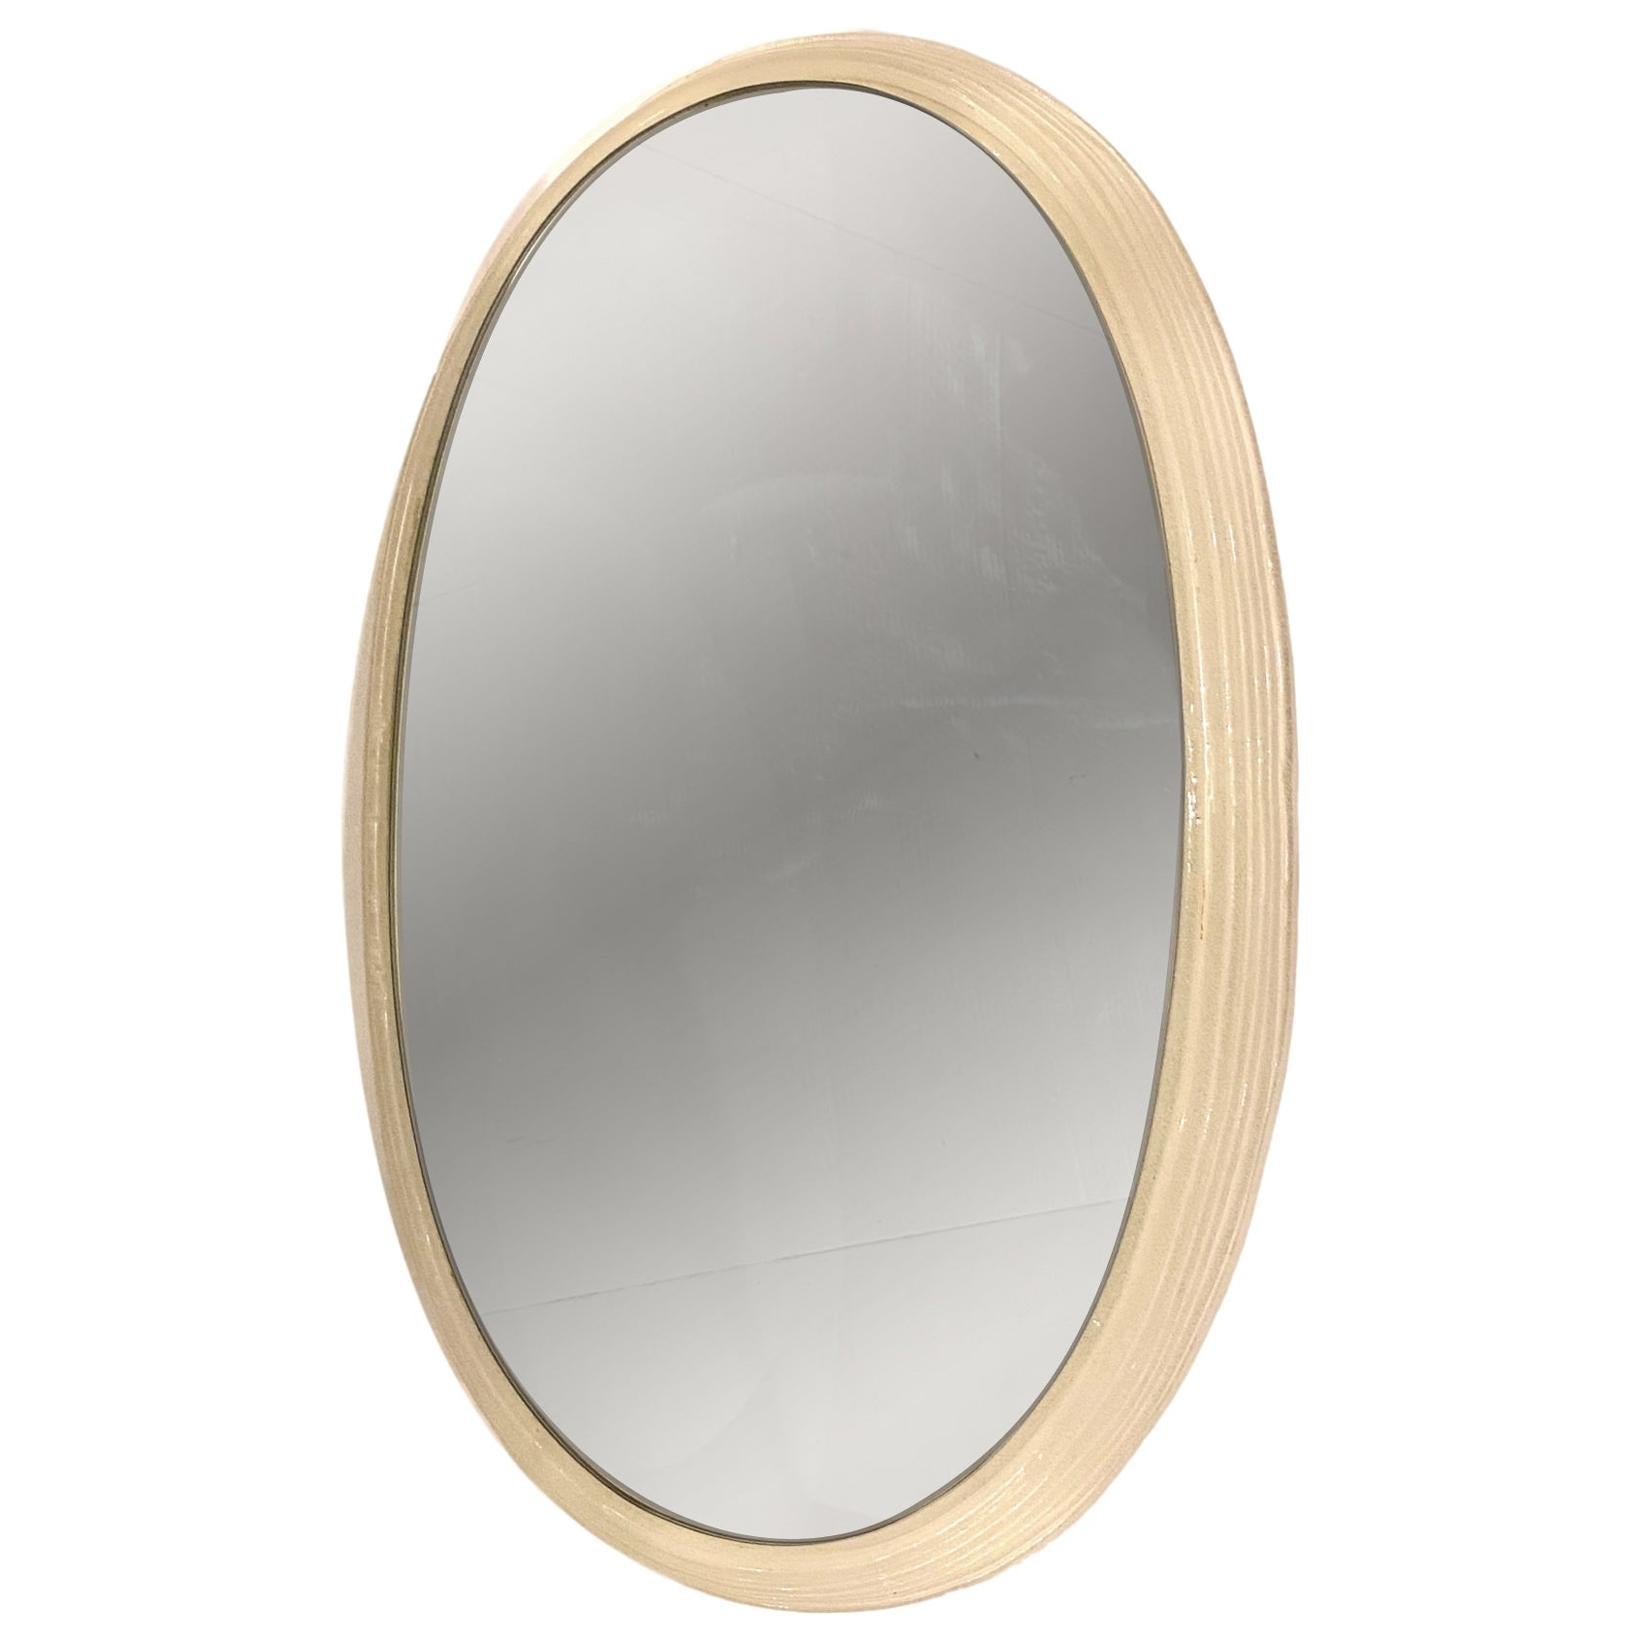 Midcentury Mirror with Back-Light Resin Frame